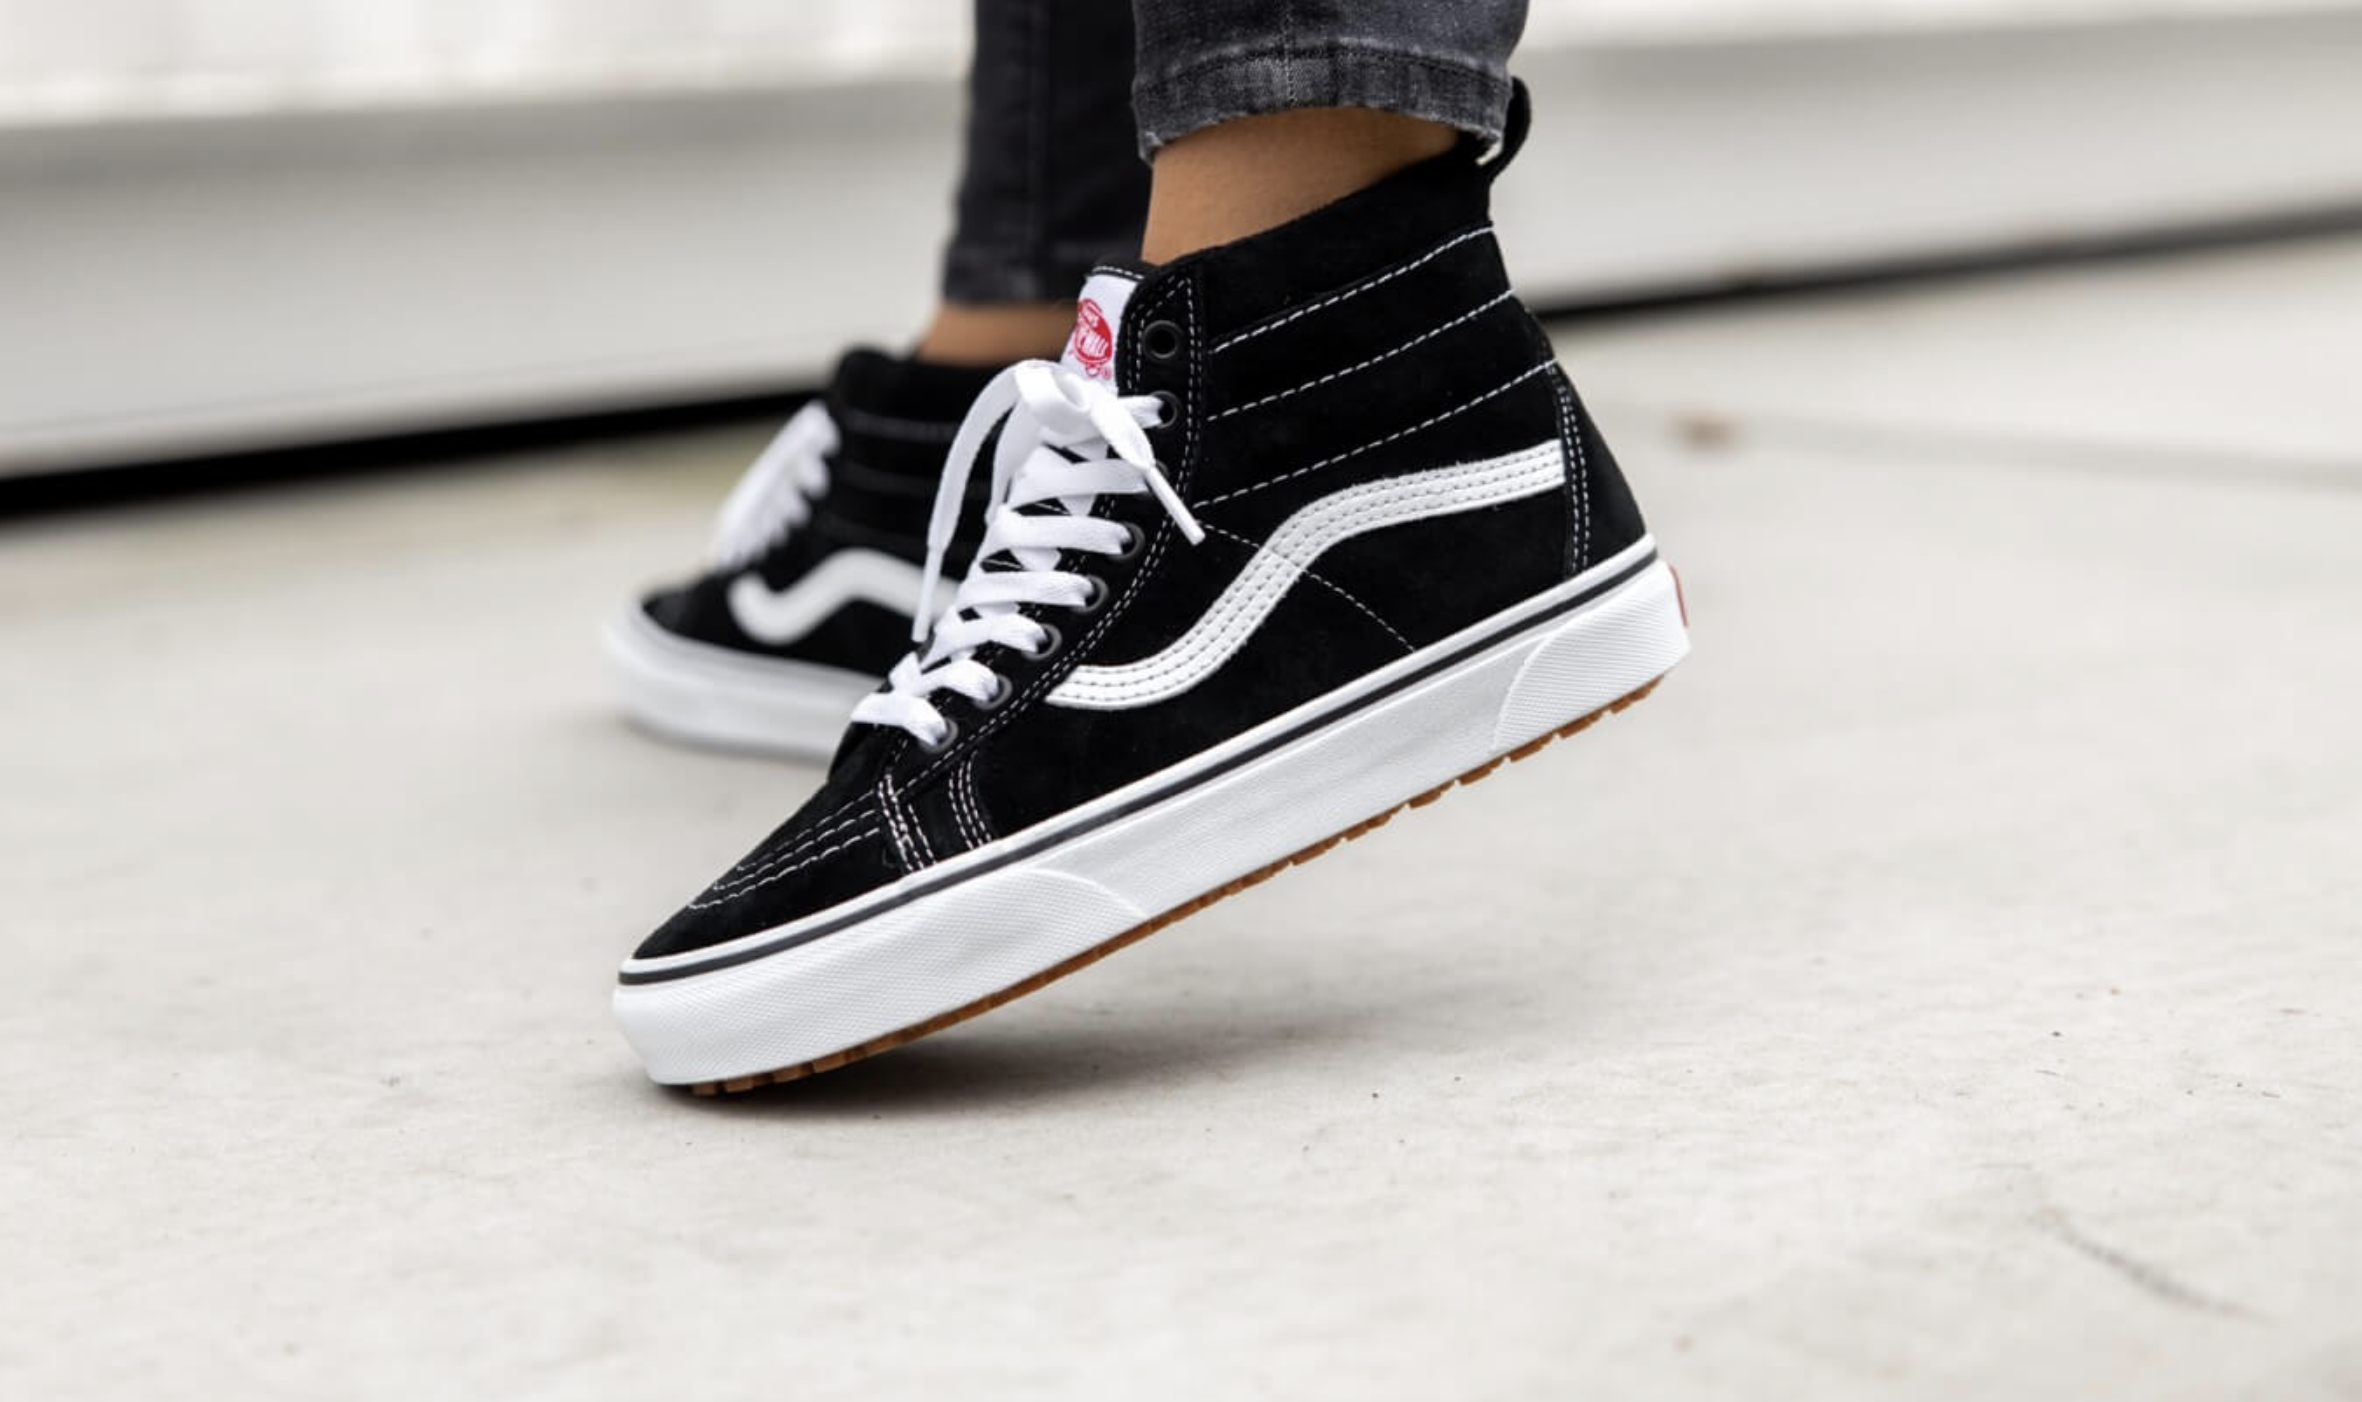 Vans High-Top Sneakers Are 50% off at Nordstrom Today - The Manual